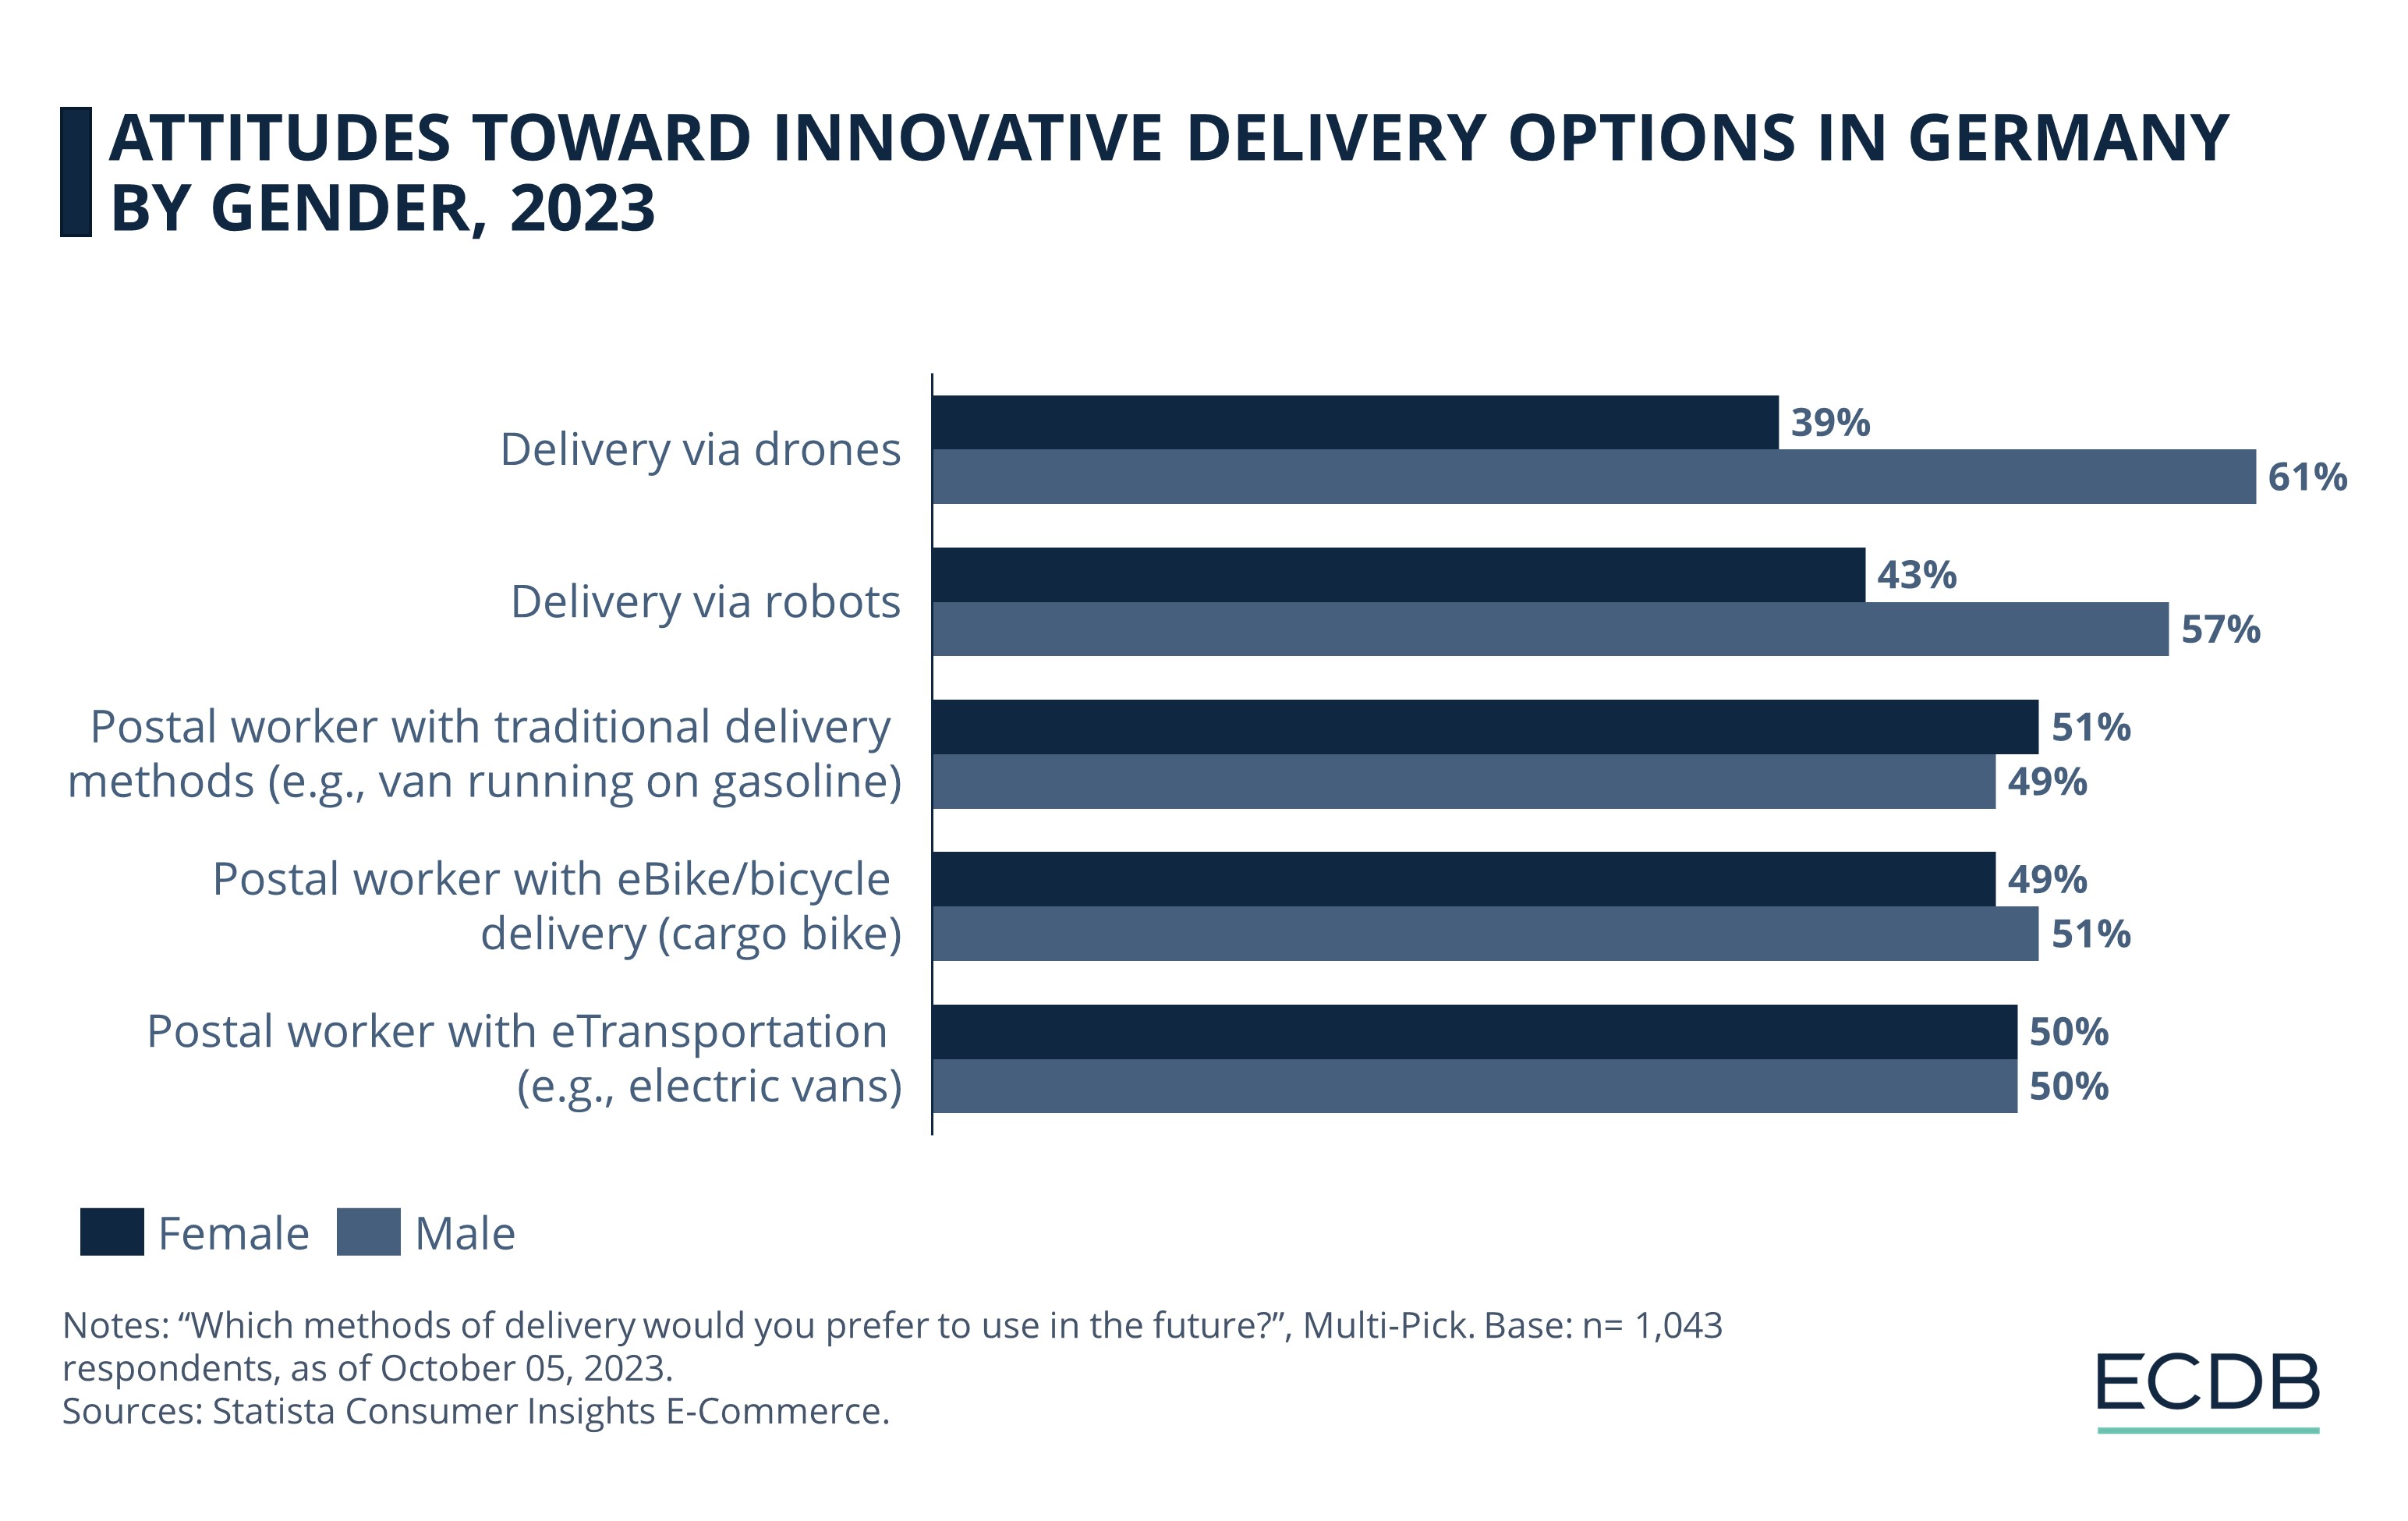 Attitudes Toward Innovative Delivery Options In Germany By Gender, 2023